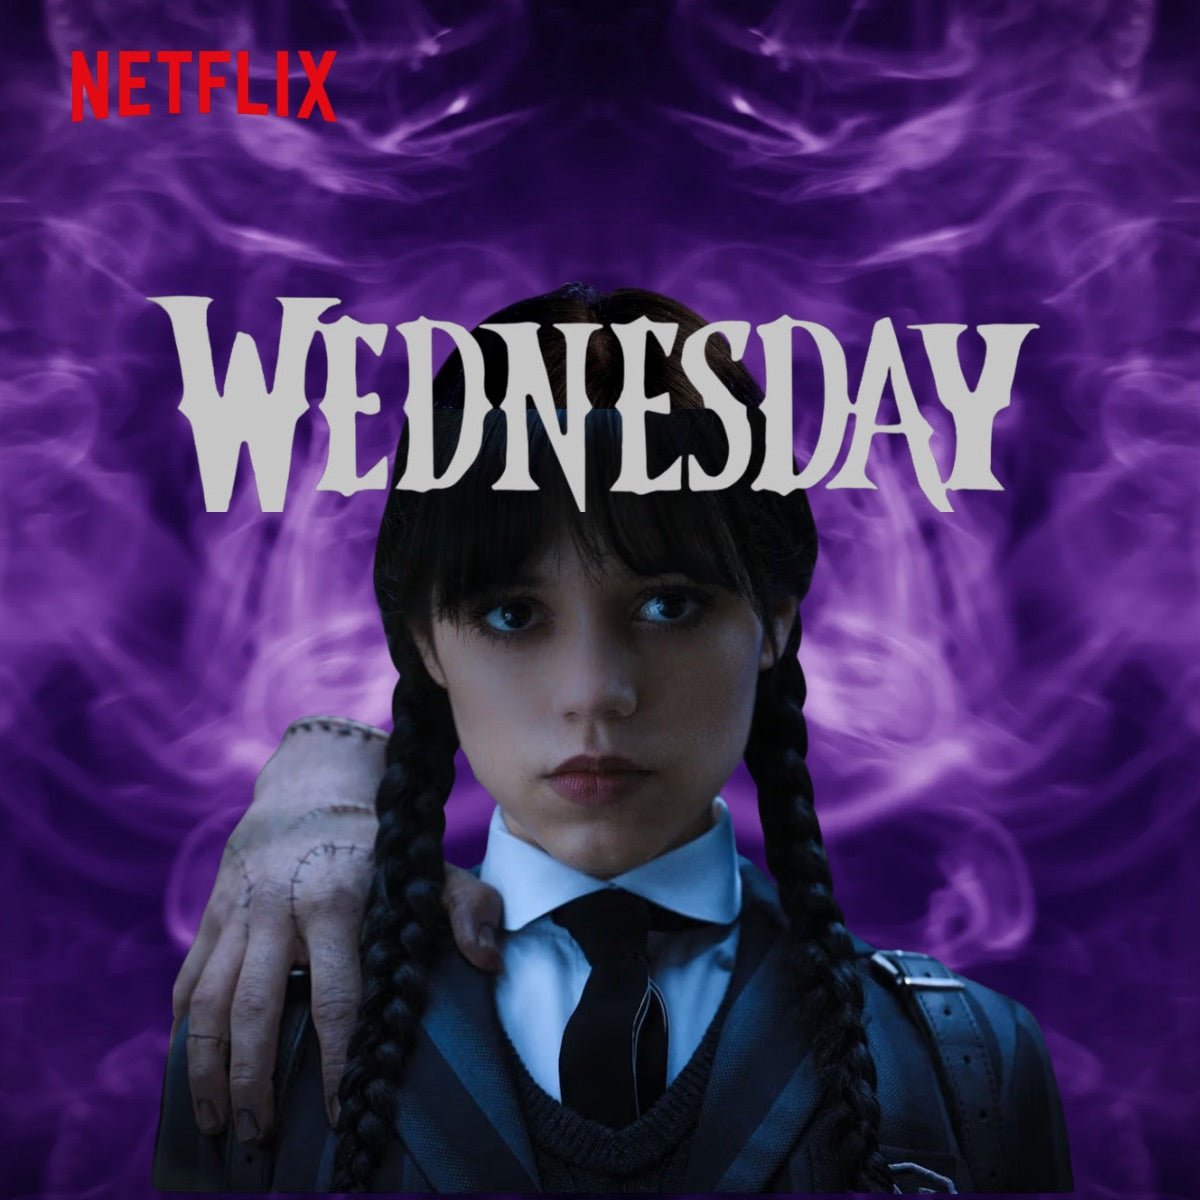 Wednesday Season 2 Updates and Speculations - A Renewal That Leaves Fans on the Edge